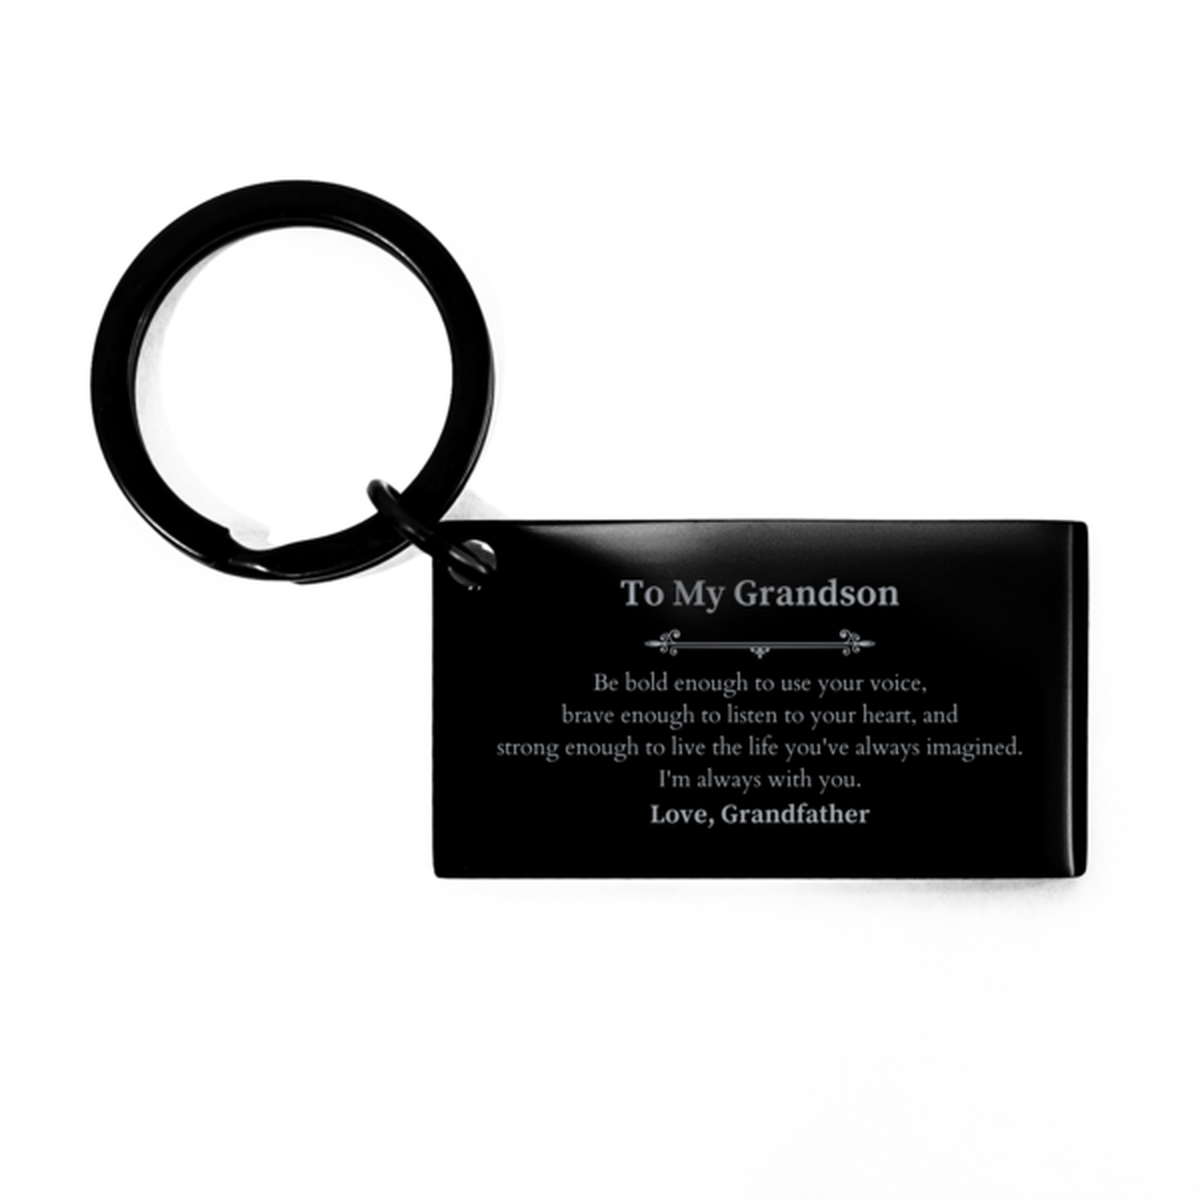 Keepsake Grandson Keychain Gift Idea Graduation Christmas Birthday Grandson from Grandfather, Grandson Be bold enough to use your voice, brave enough to listen to your heart. Love, Grandfather